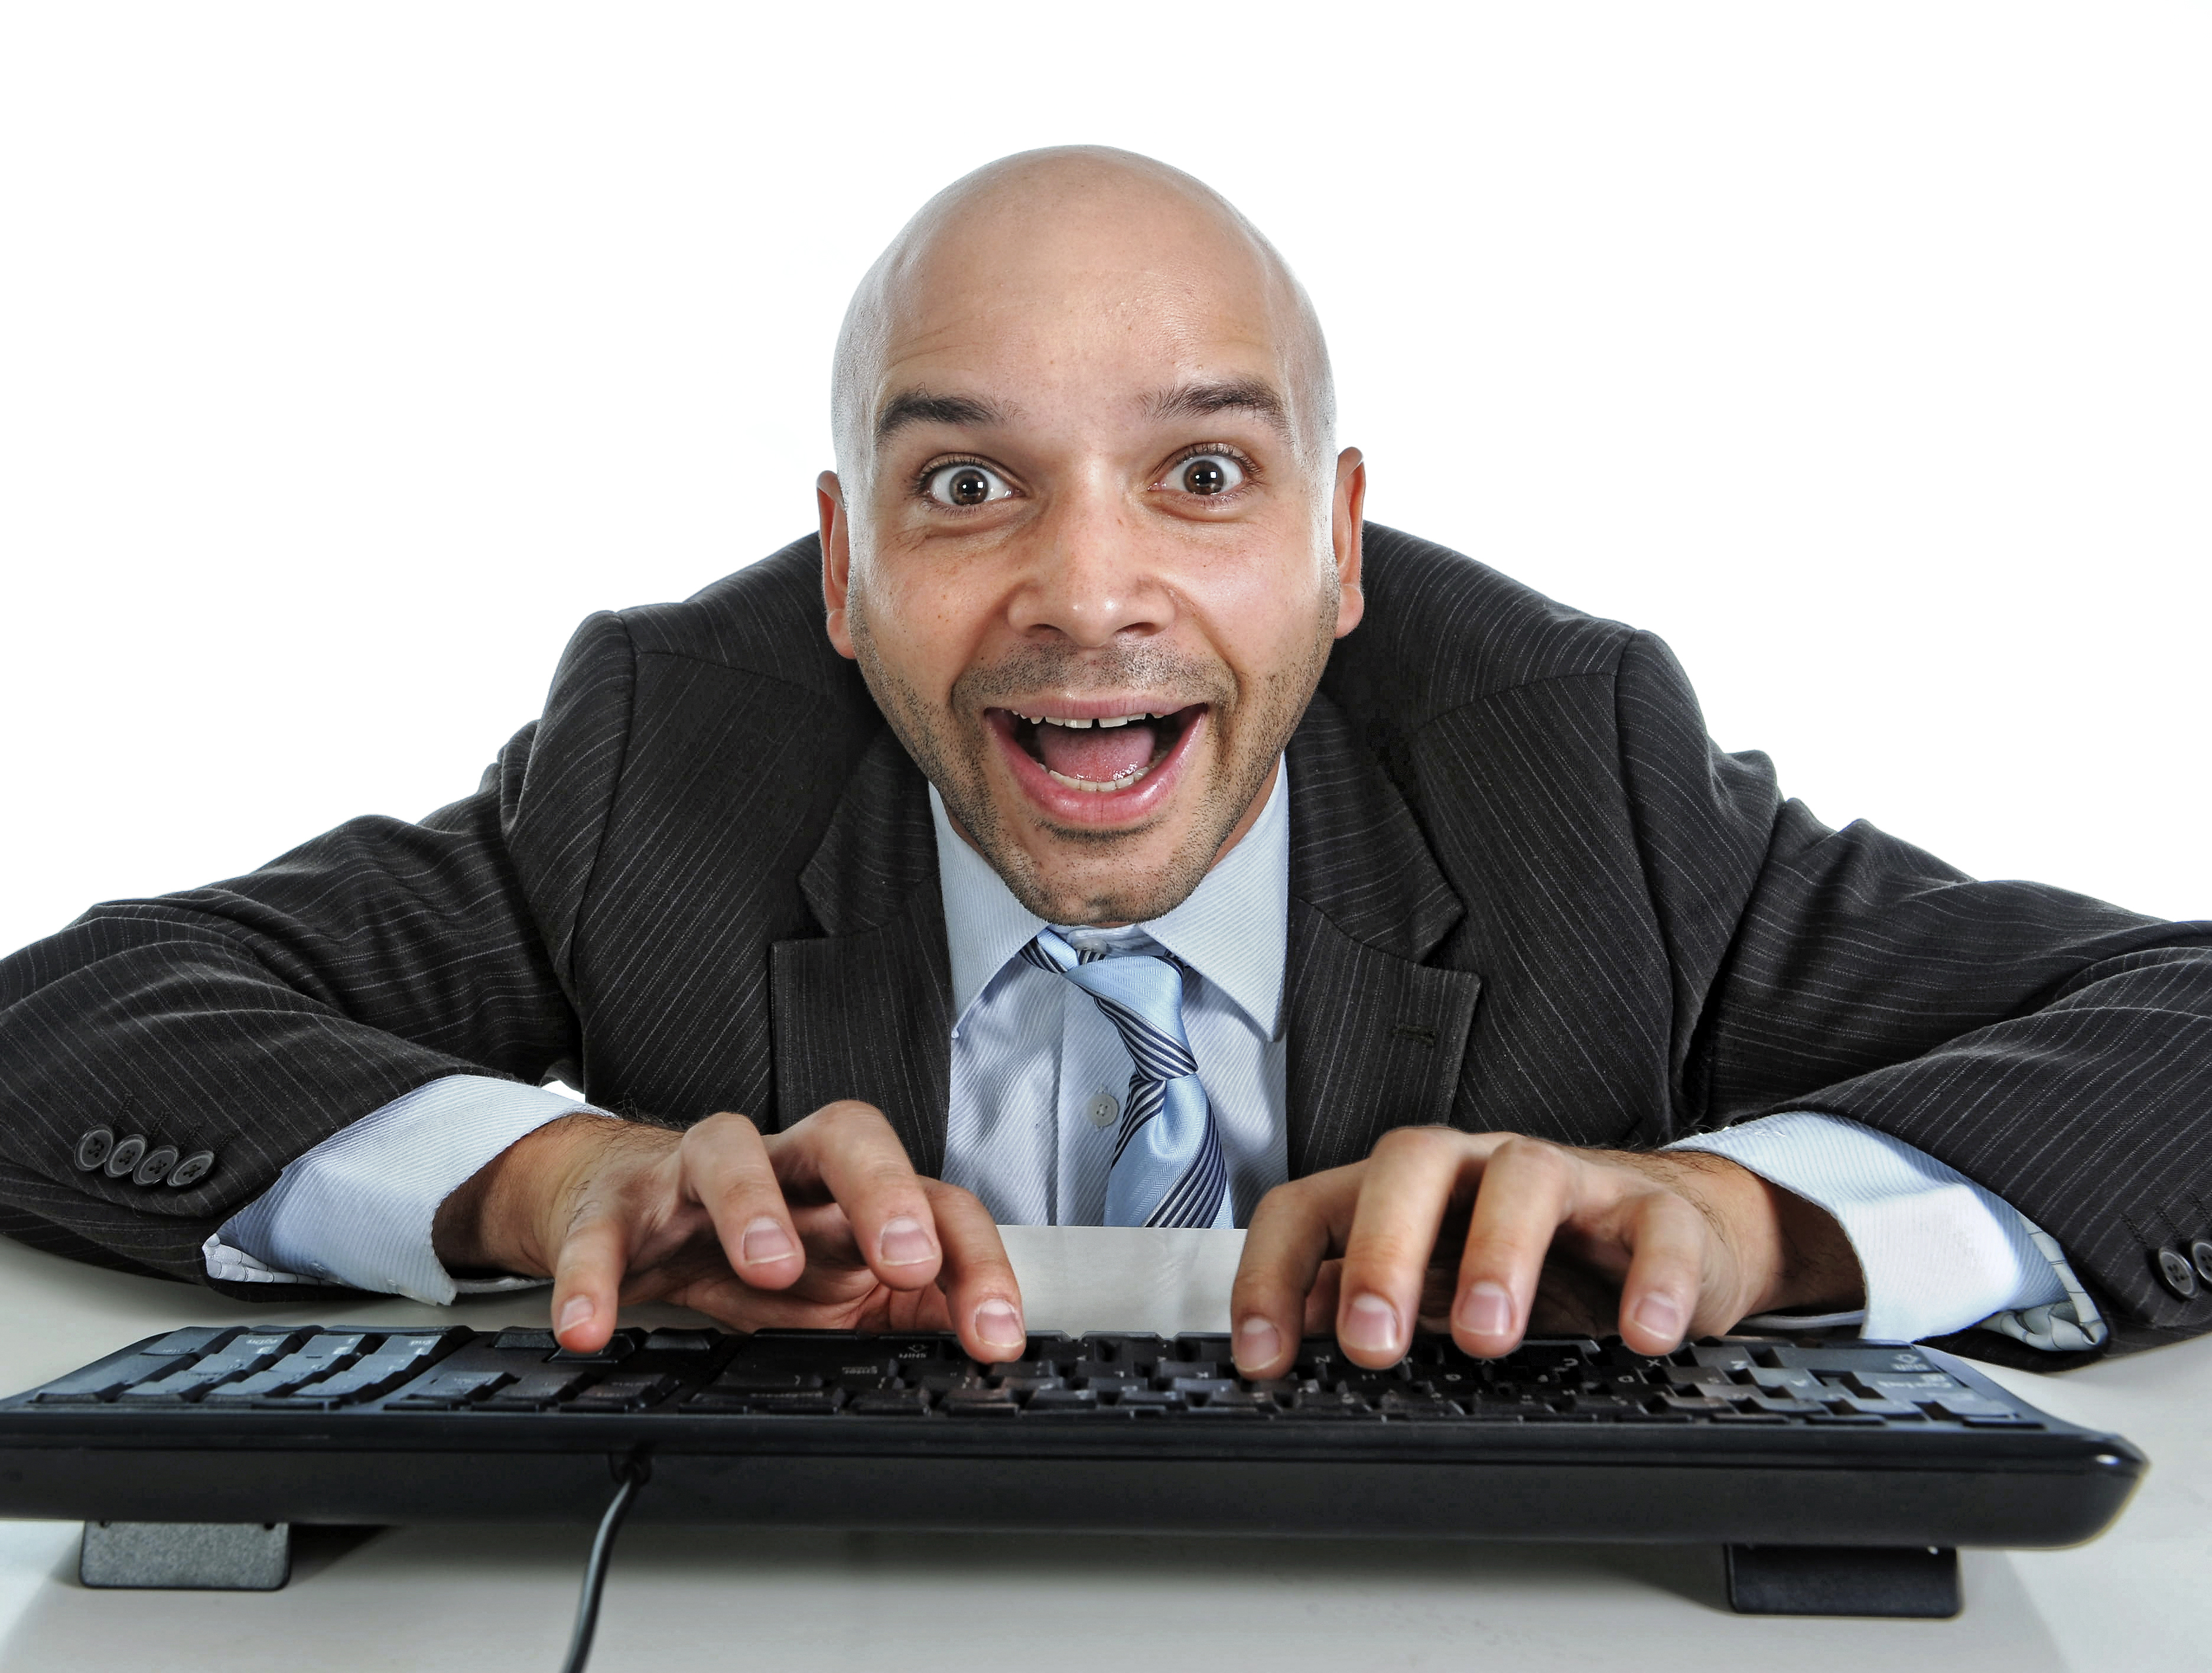 a man in a suit and tie typing on a keyboard